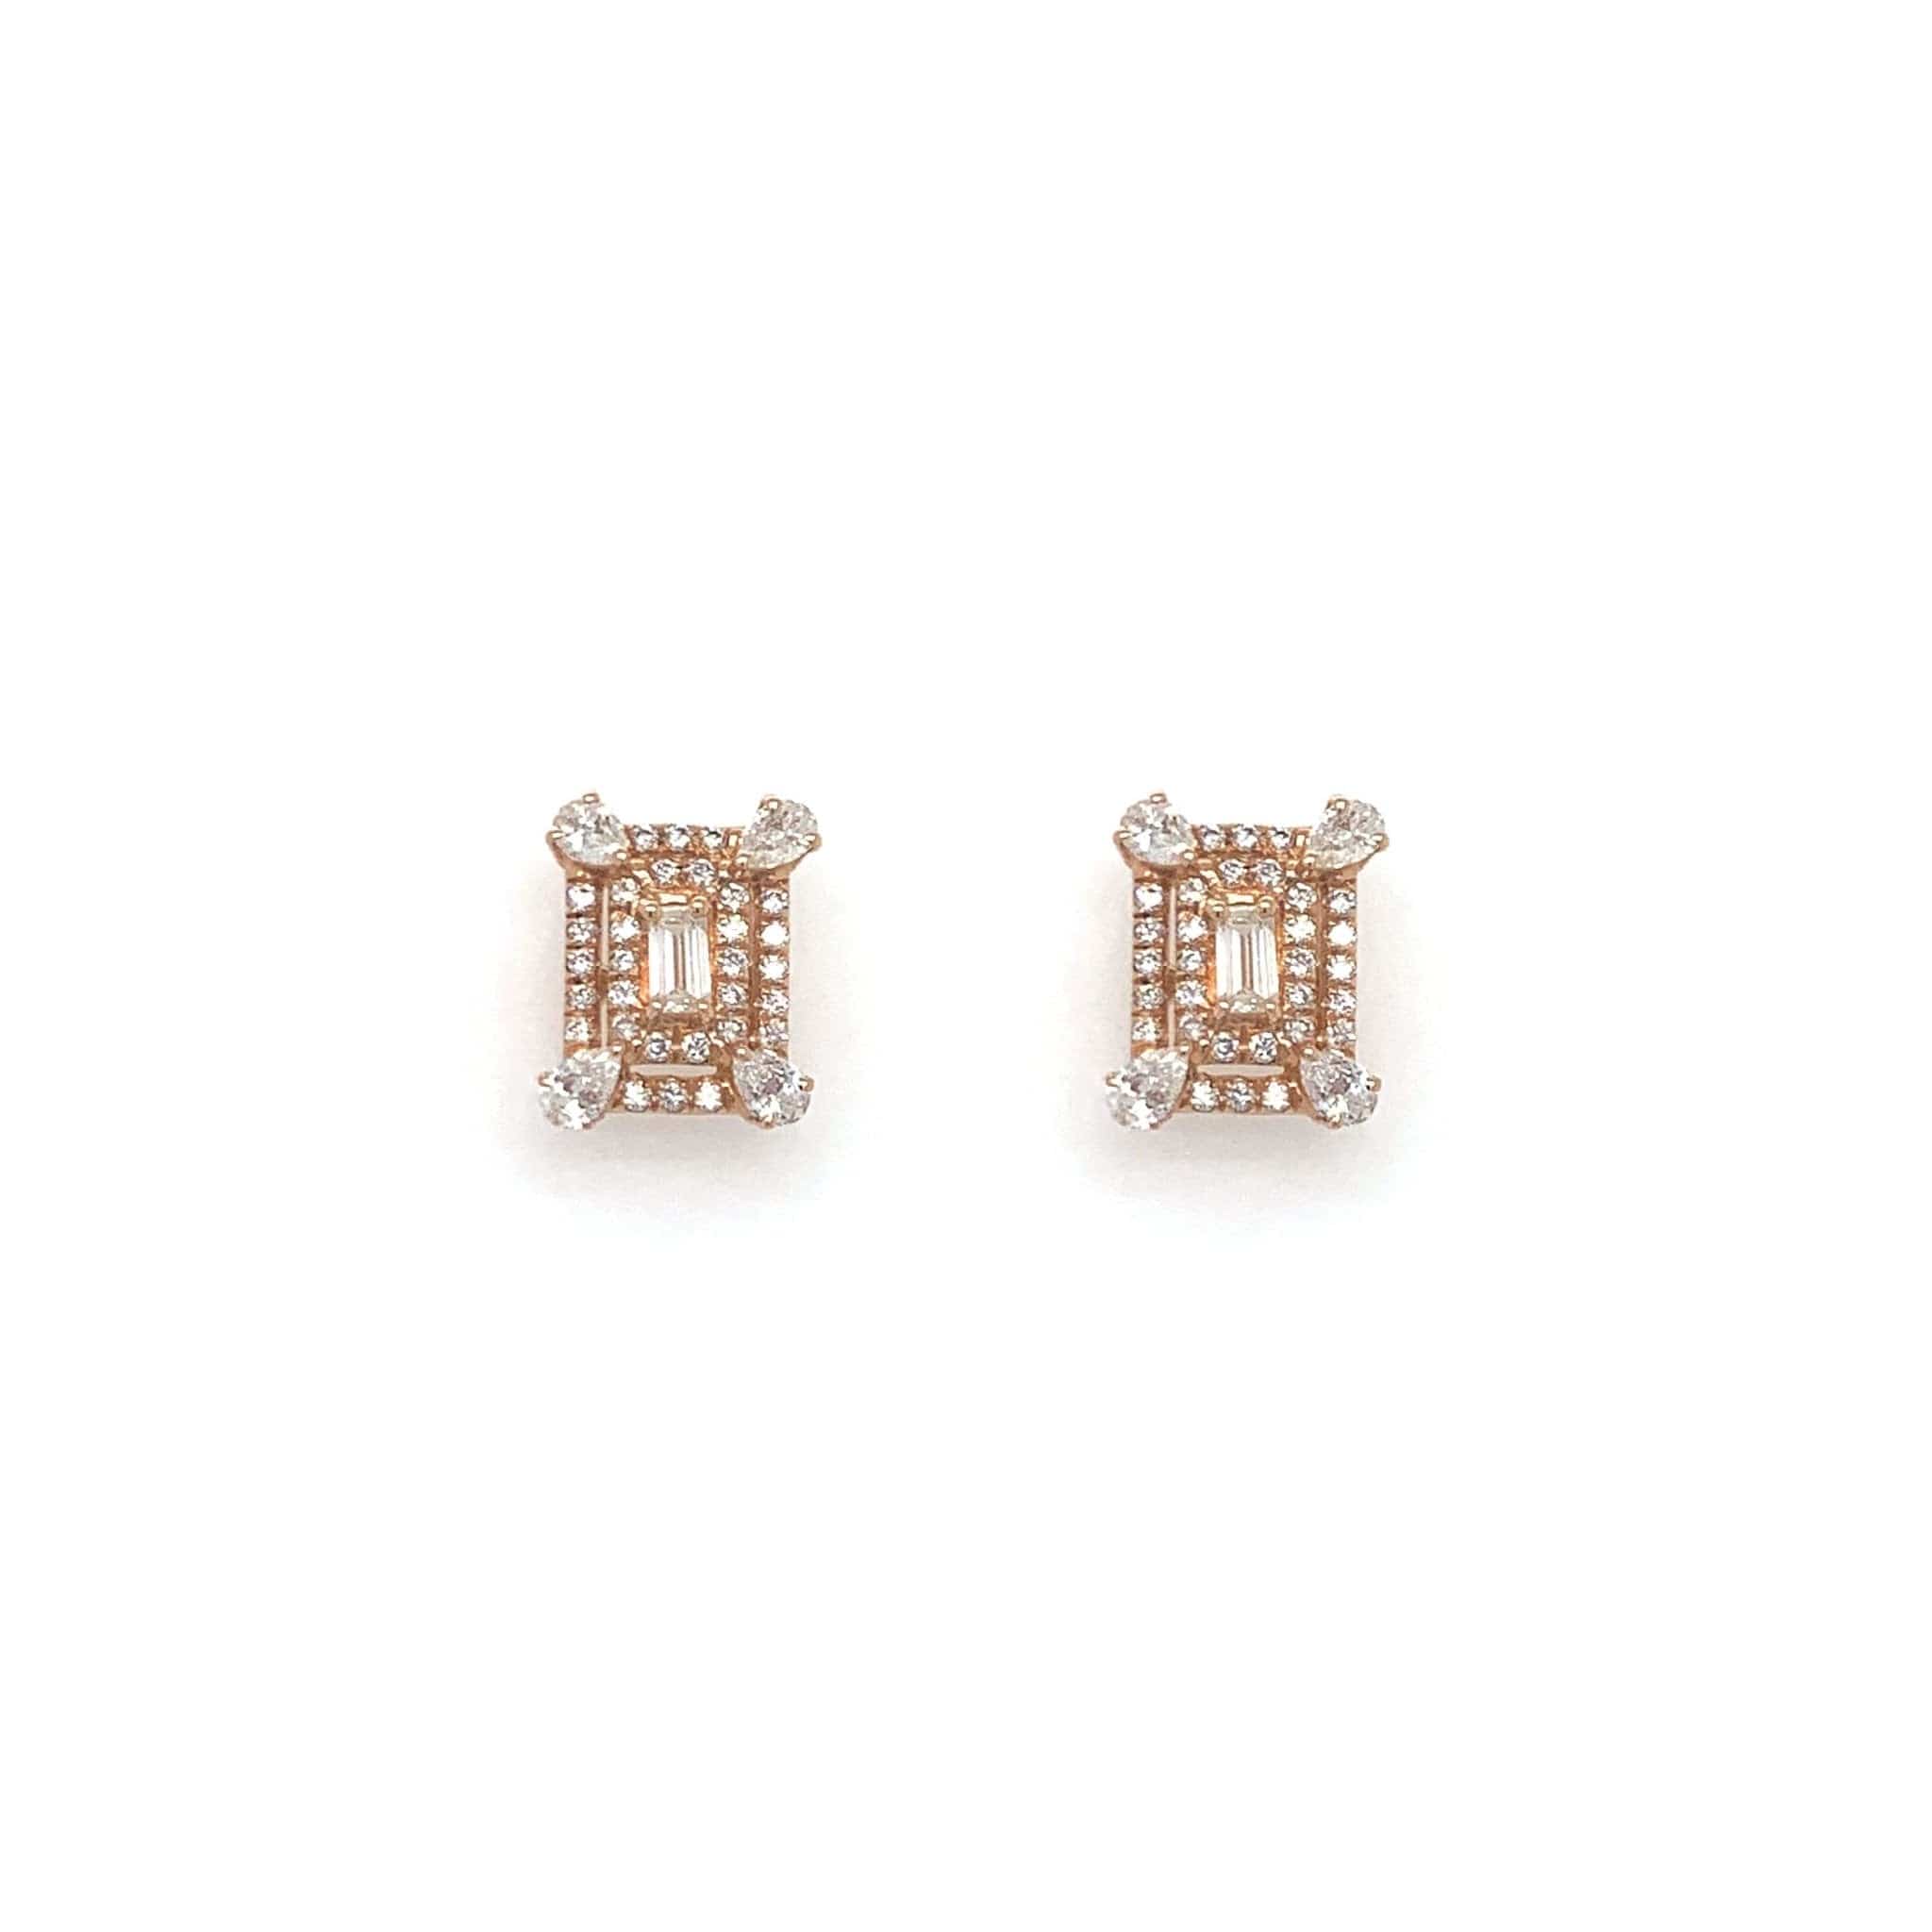 M.Fitaihi Timeless Baguette - Rose Gold Square Earrings - M.Fitaihi